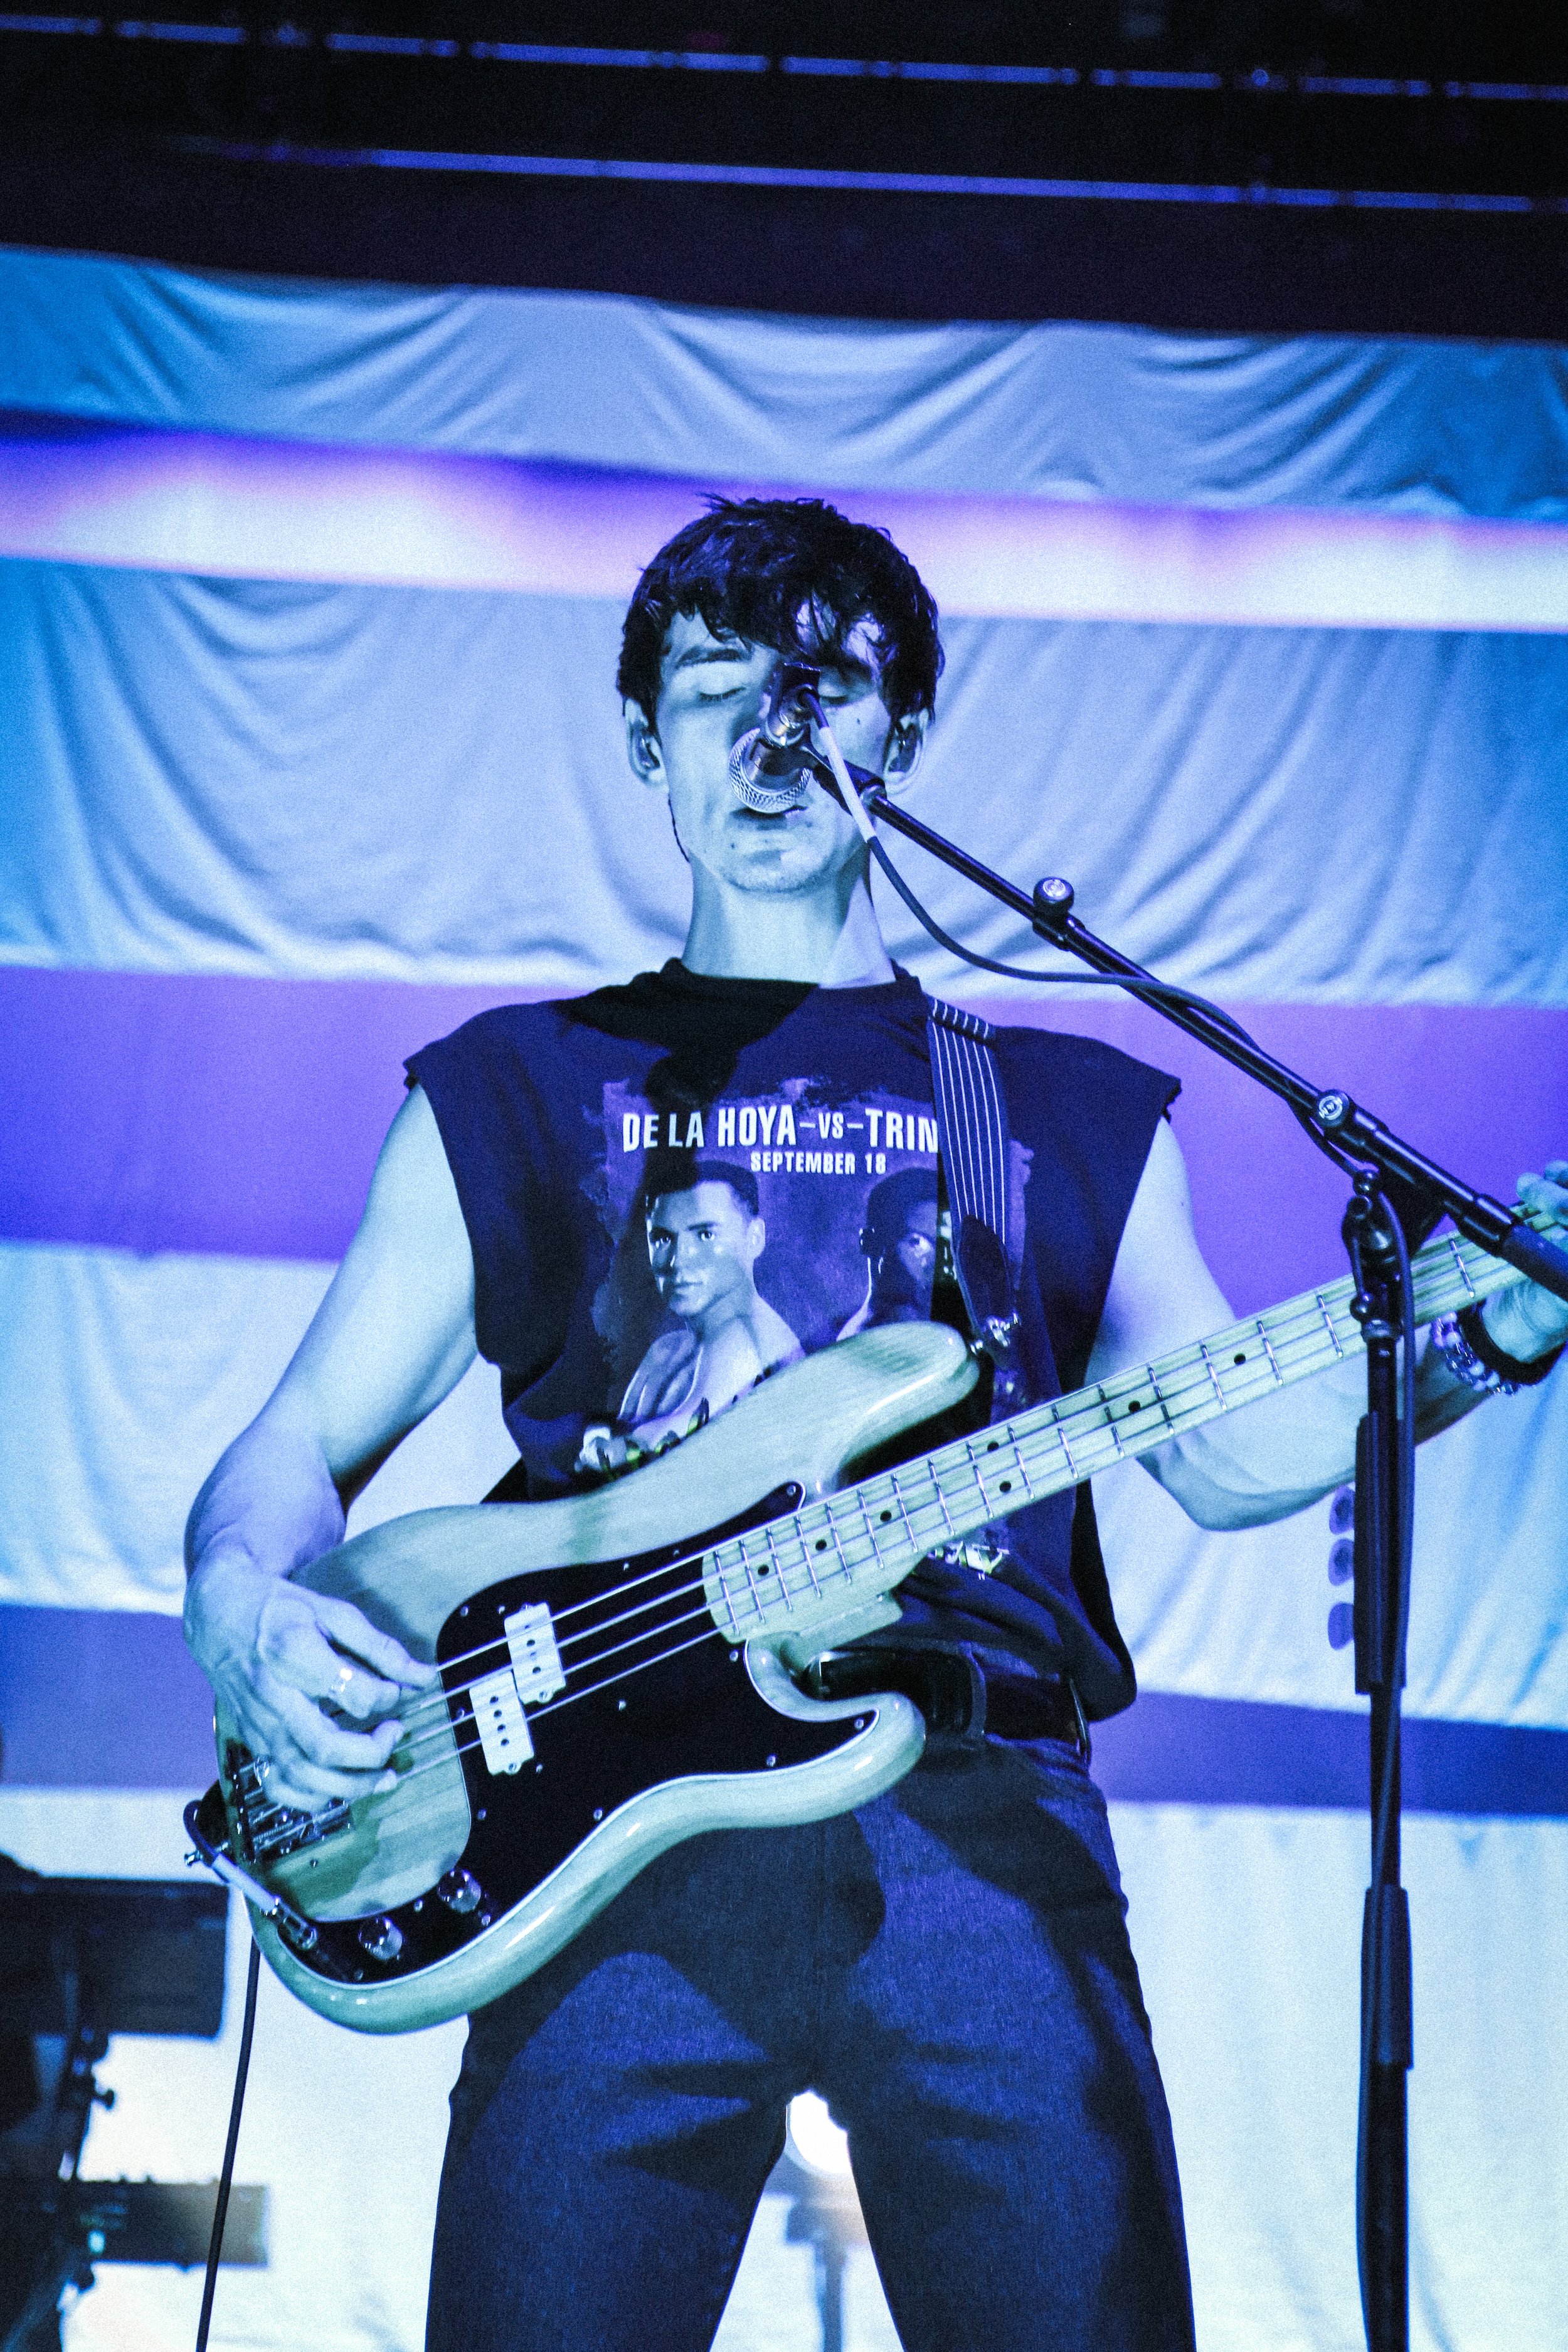  Bassist Zack Sutton of Hippo Campus sings along.  